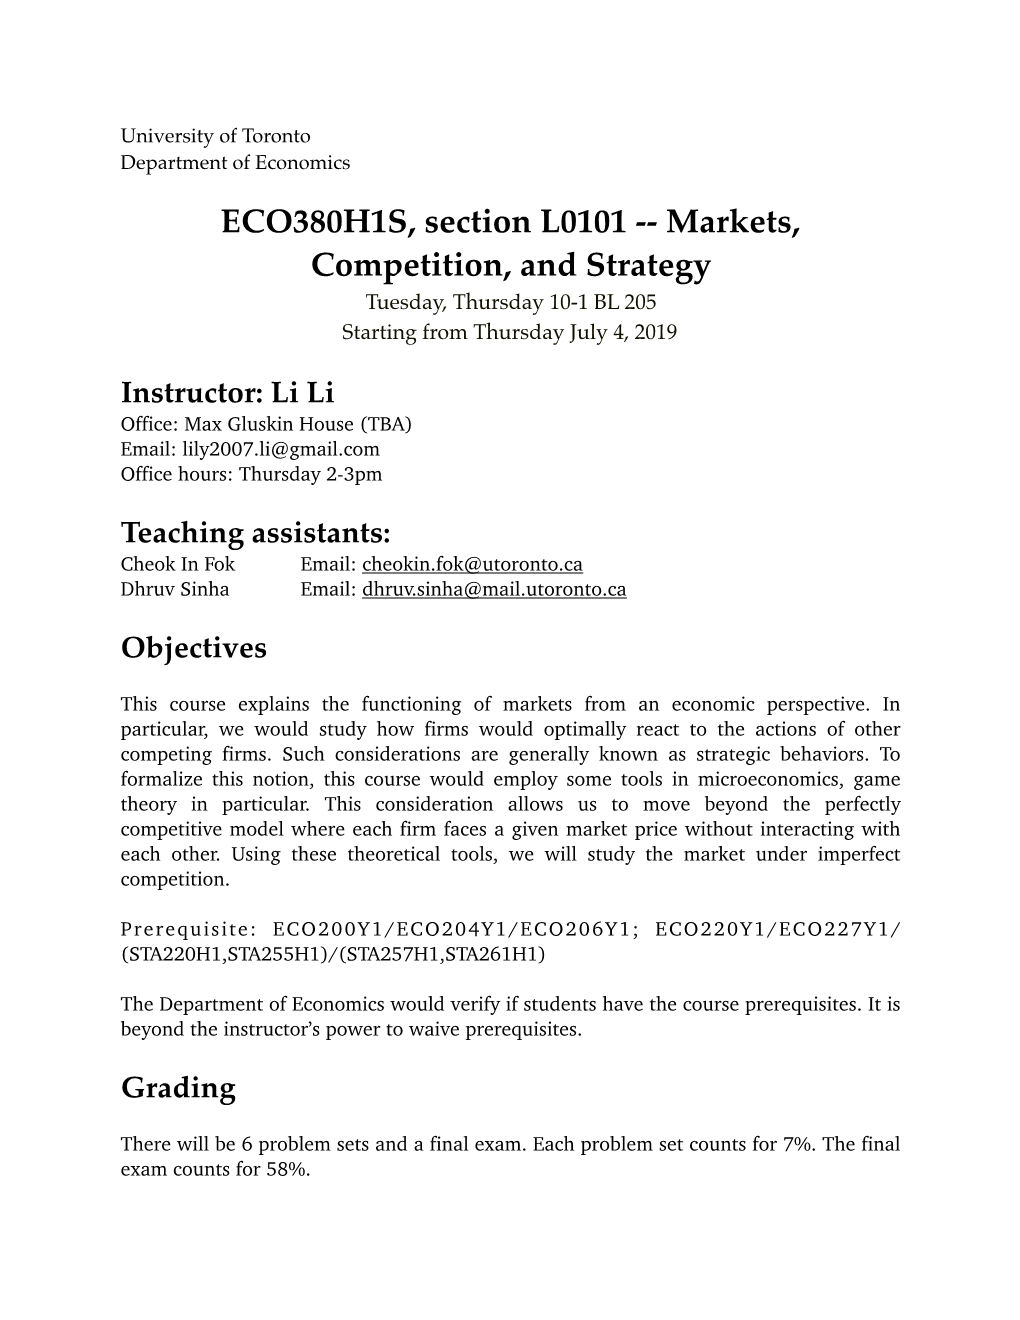 ECO380H1S, Section L0101 -- Markets, Competition, and Strategy Tuesday, Thursday 10-1 BL 205 Starting from Thursday July 4, 2019